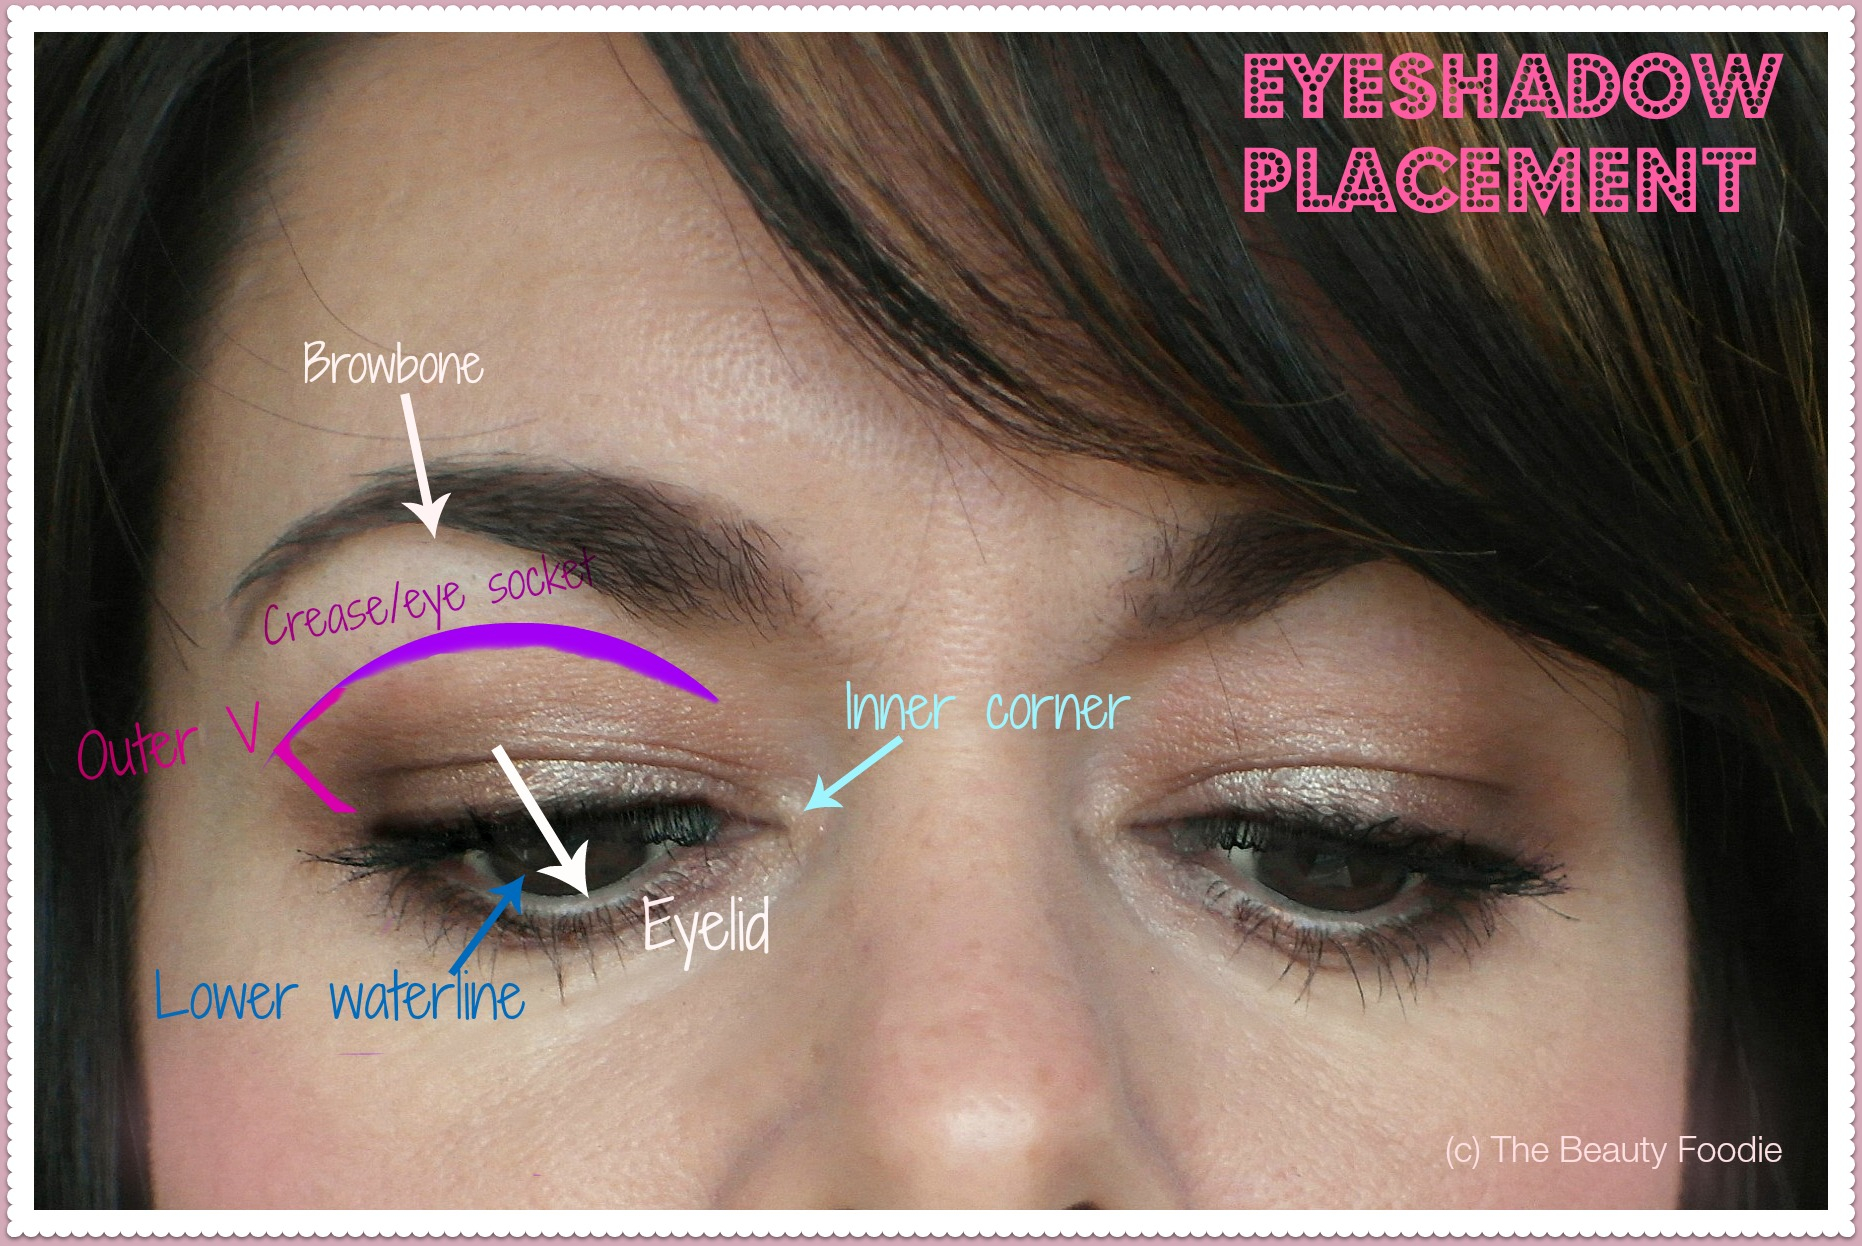 How To Do My Eye Makeup Eyeshadow Placement Where Do I Apply It The Beauty Foodie